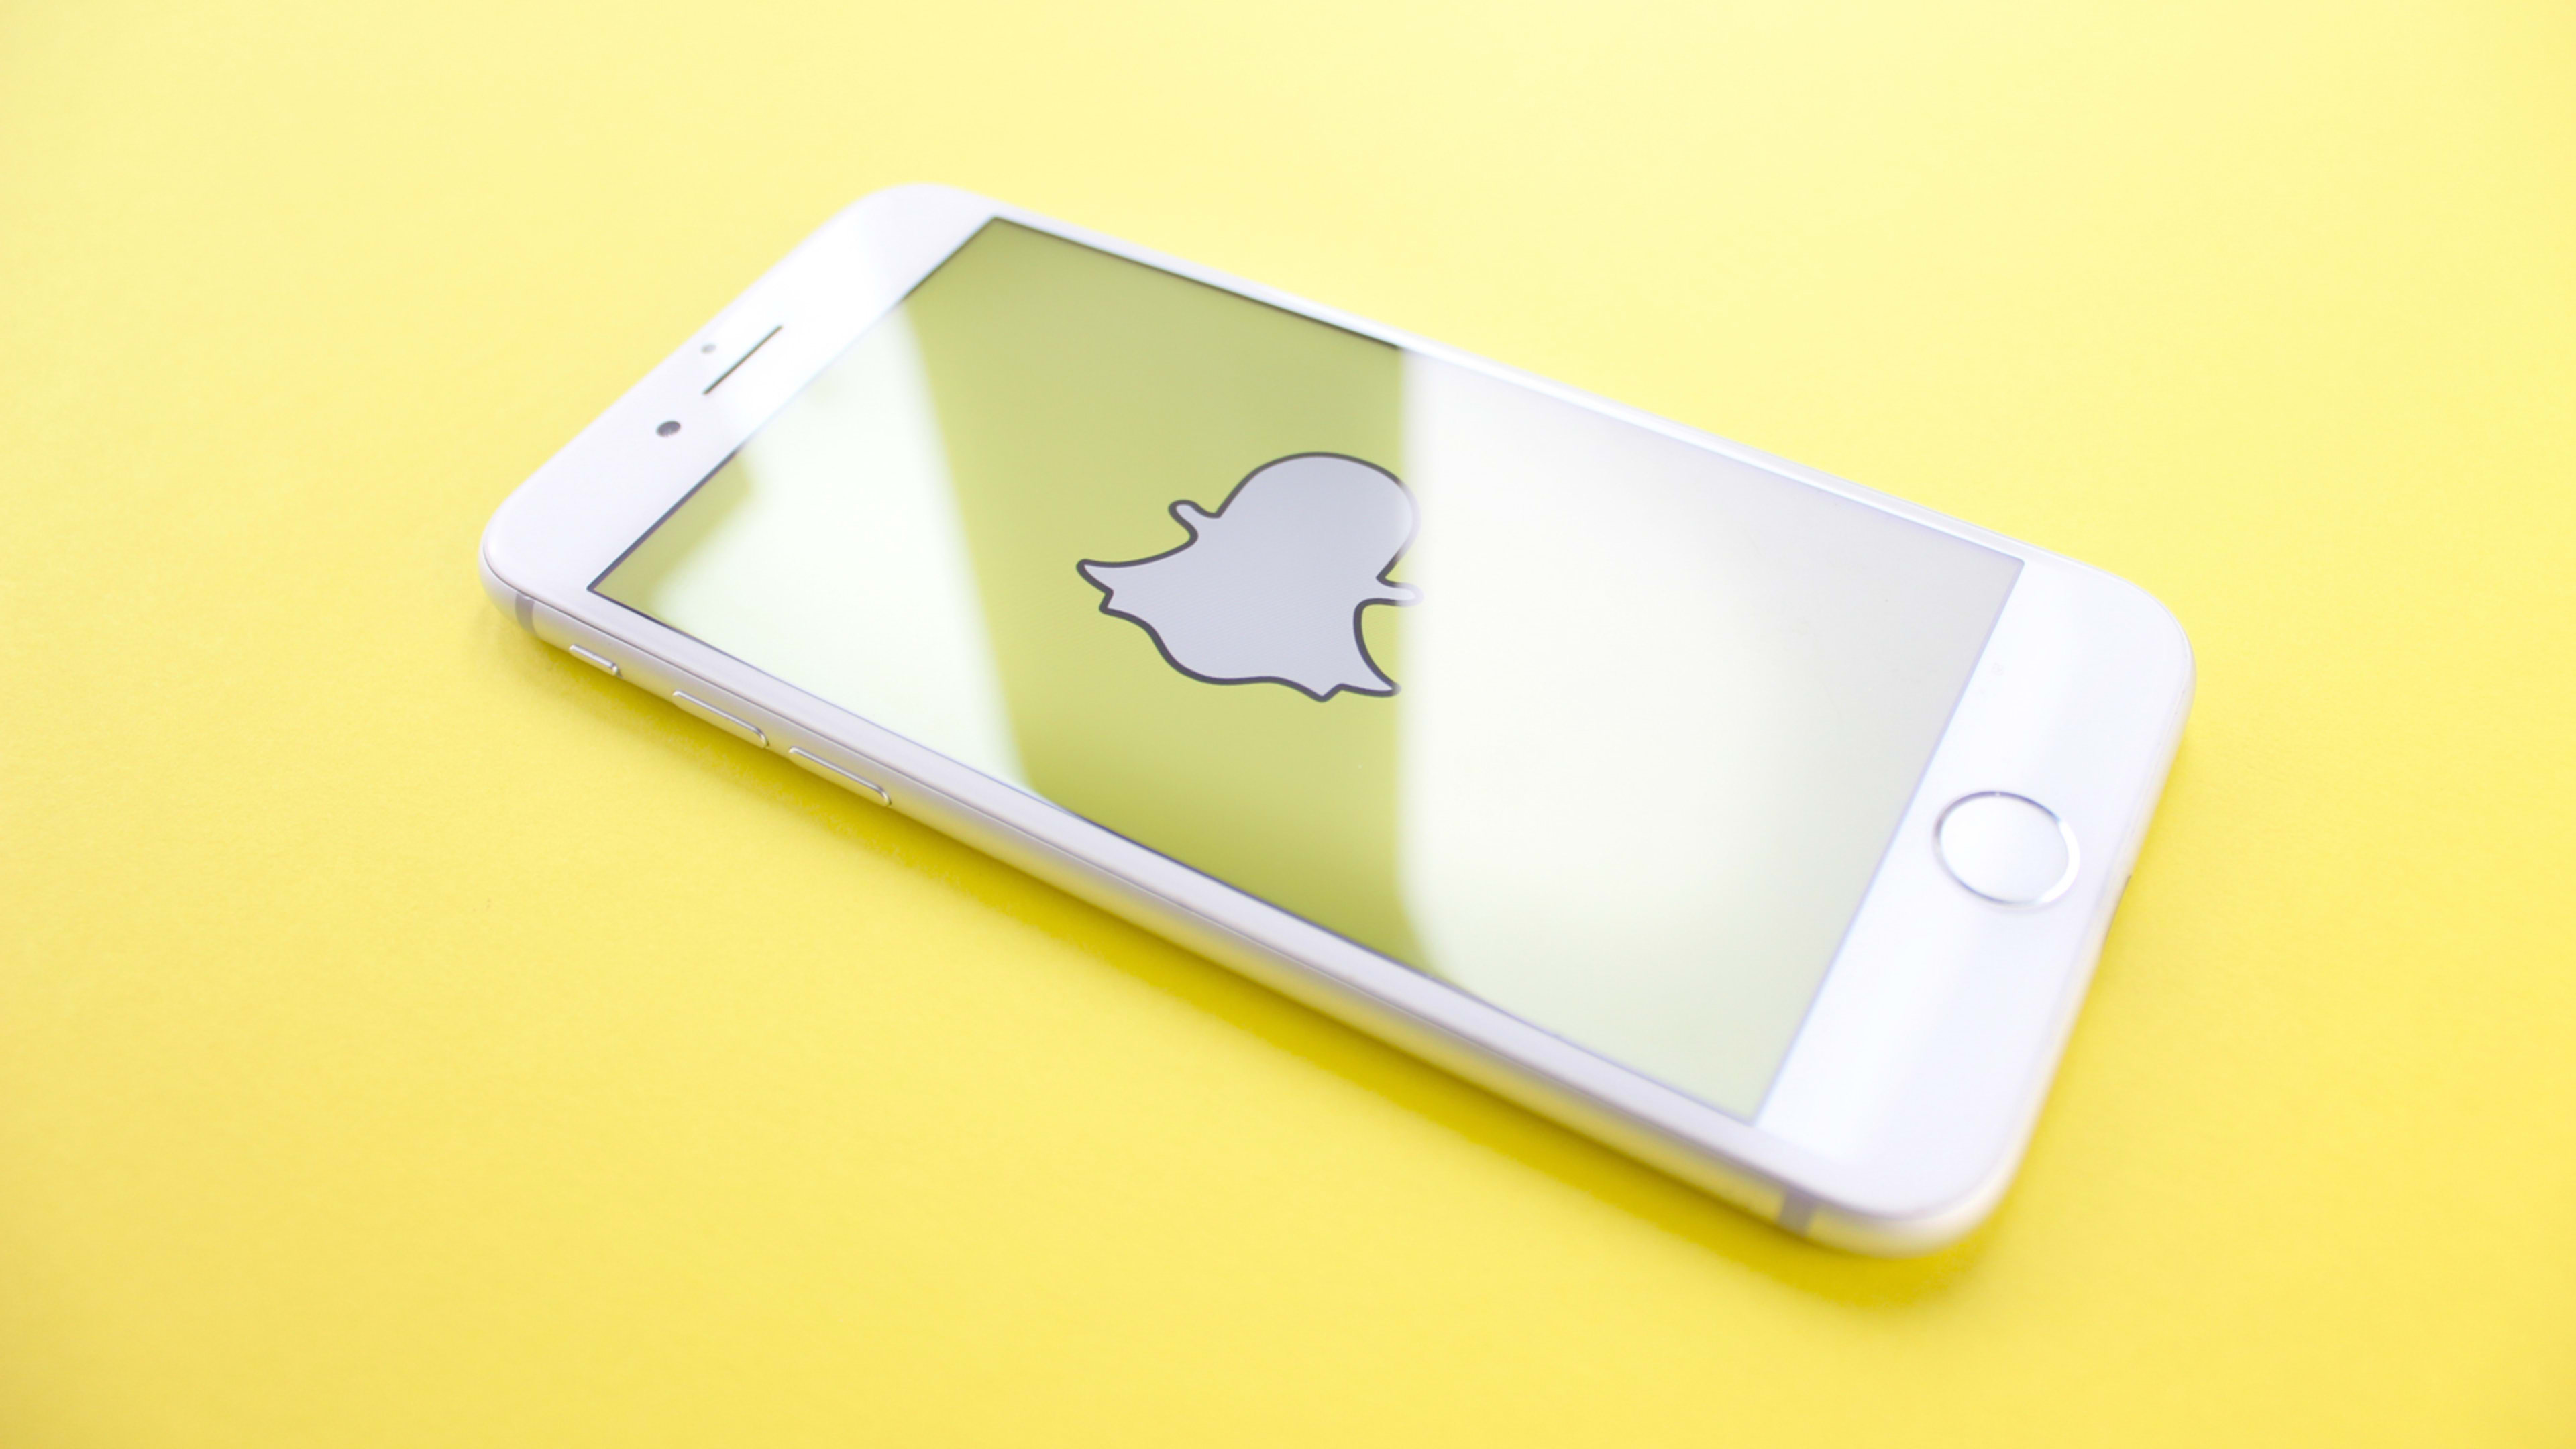 Snap just lost its chief strategy officer